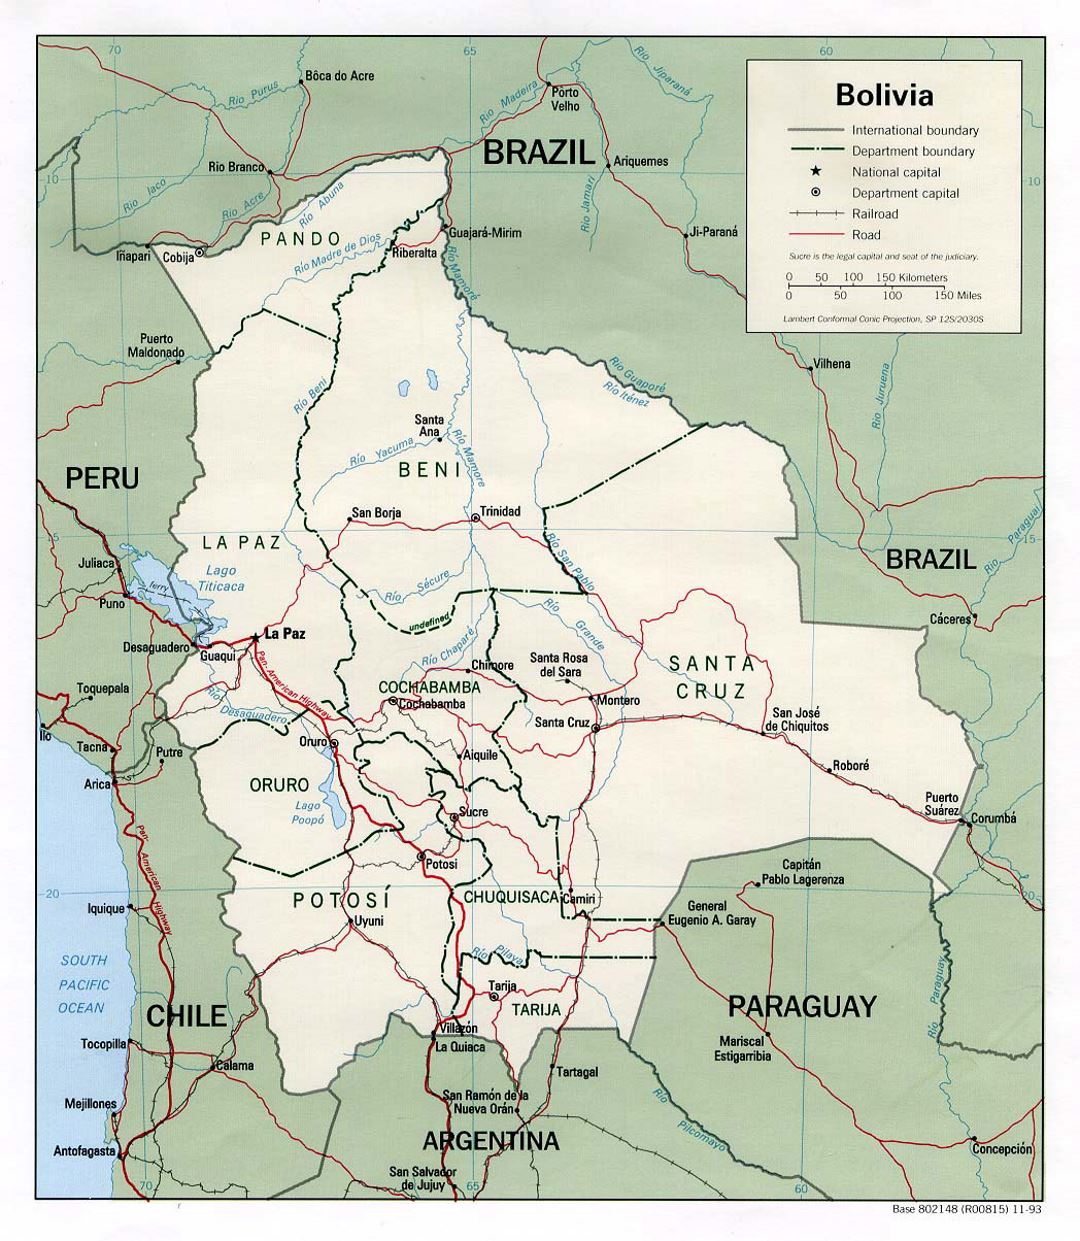 Detailed political and administrative map of Bolivia with roads and major cities - 1993